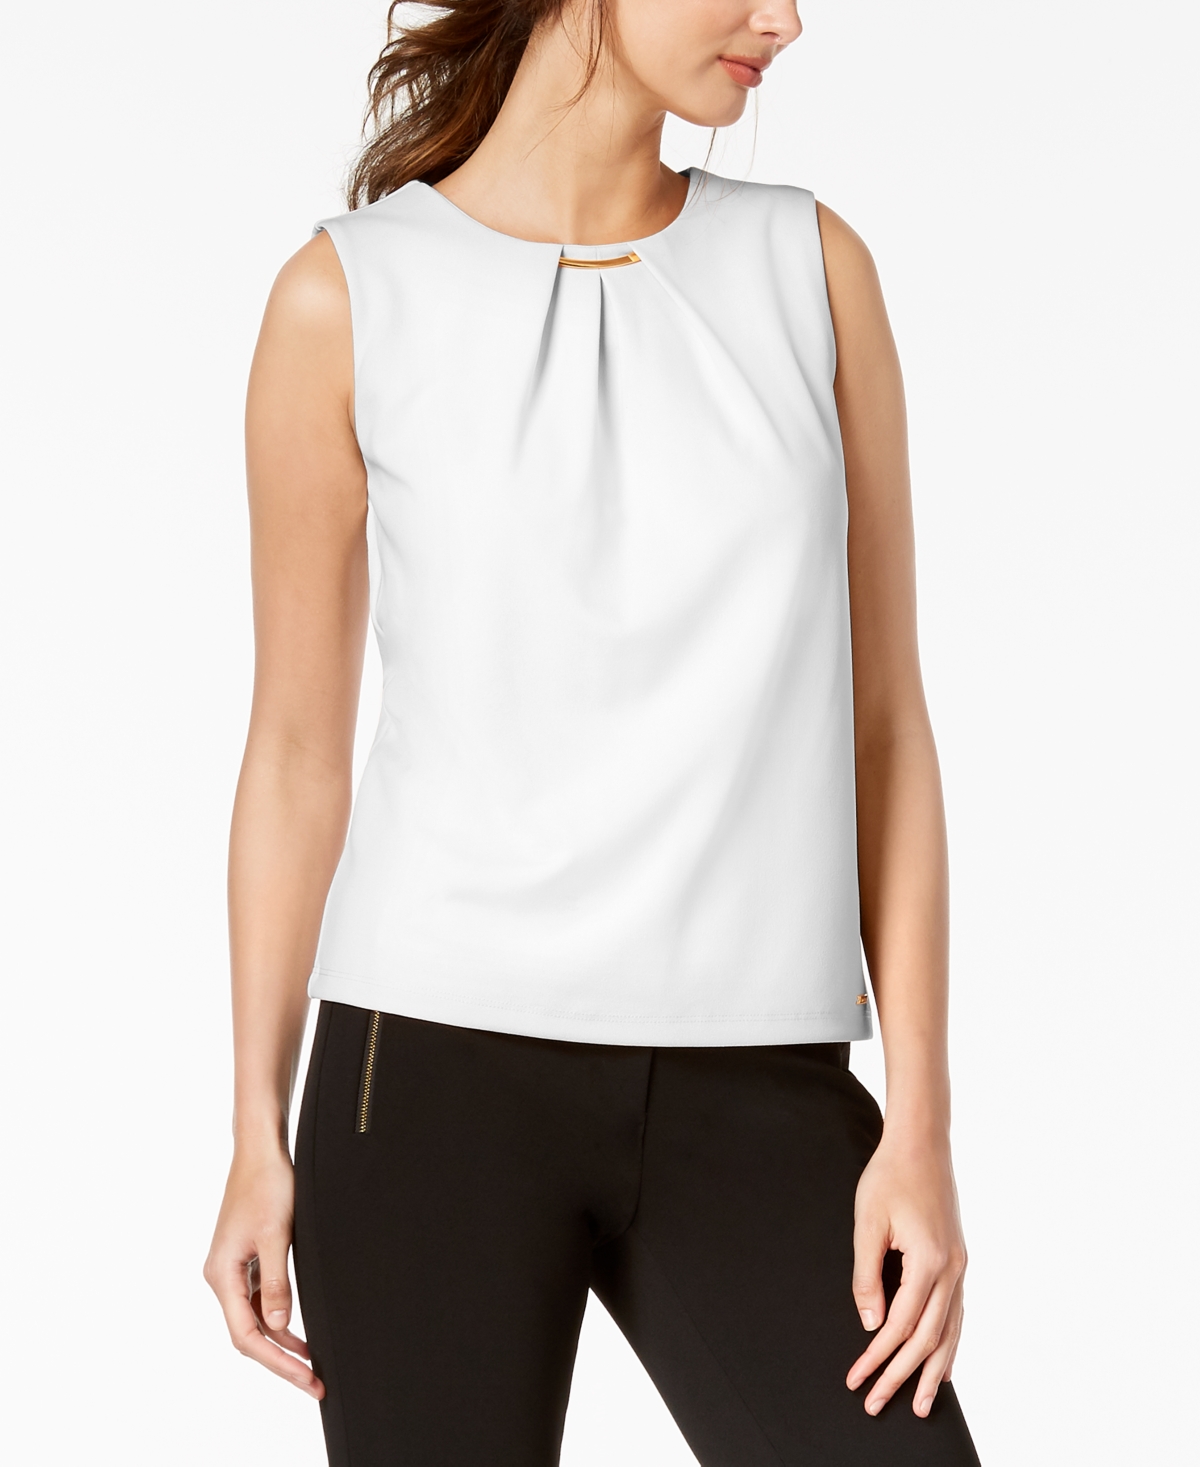 Calvin Klein Embellished Pleated Sleeveless Top